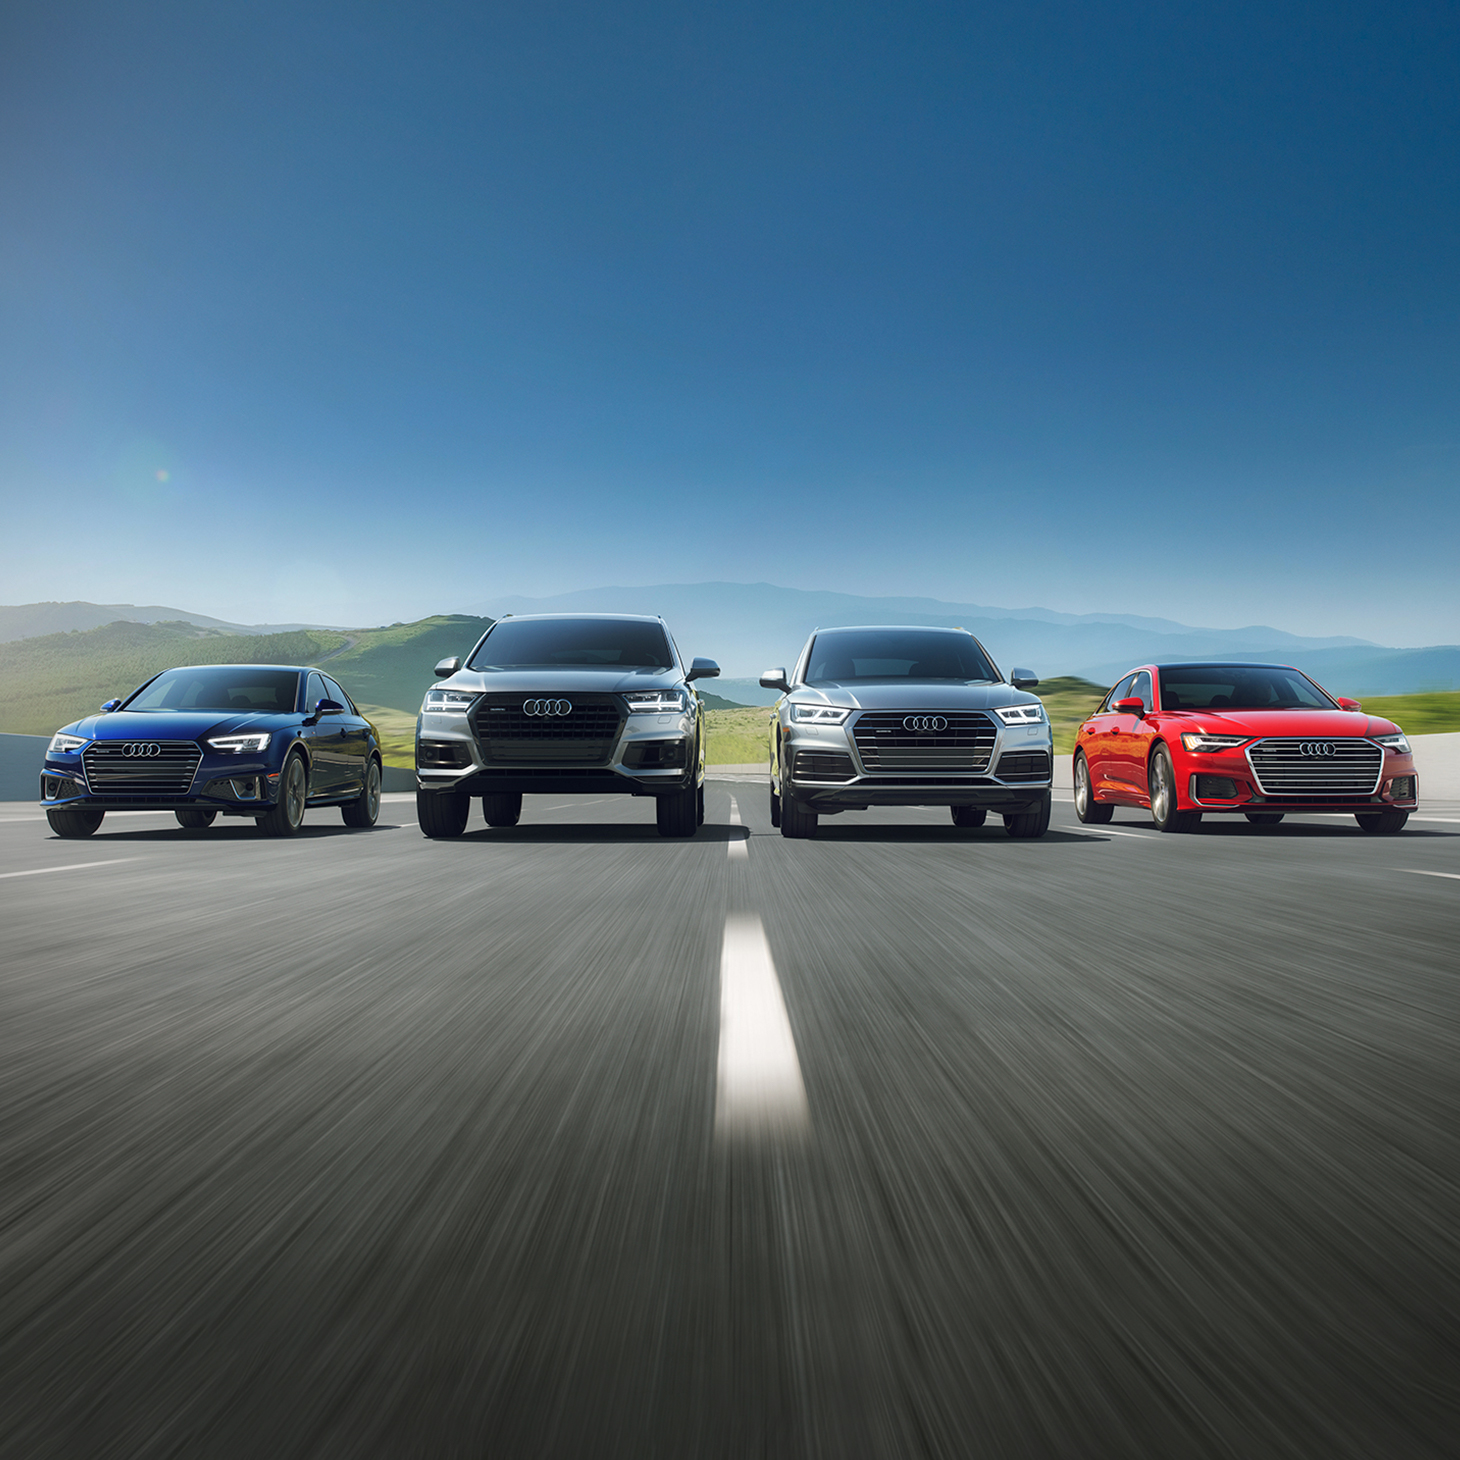 Front view of a range of Audi models in motion.